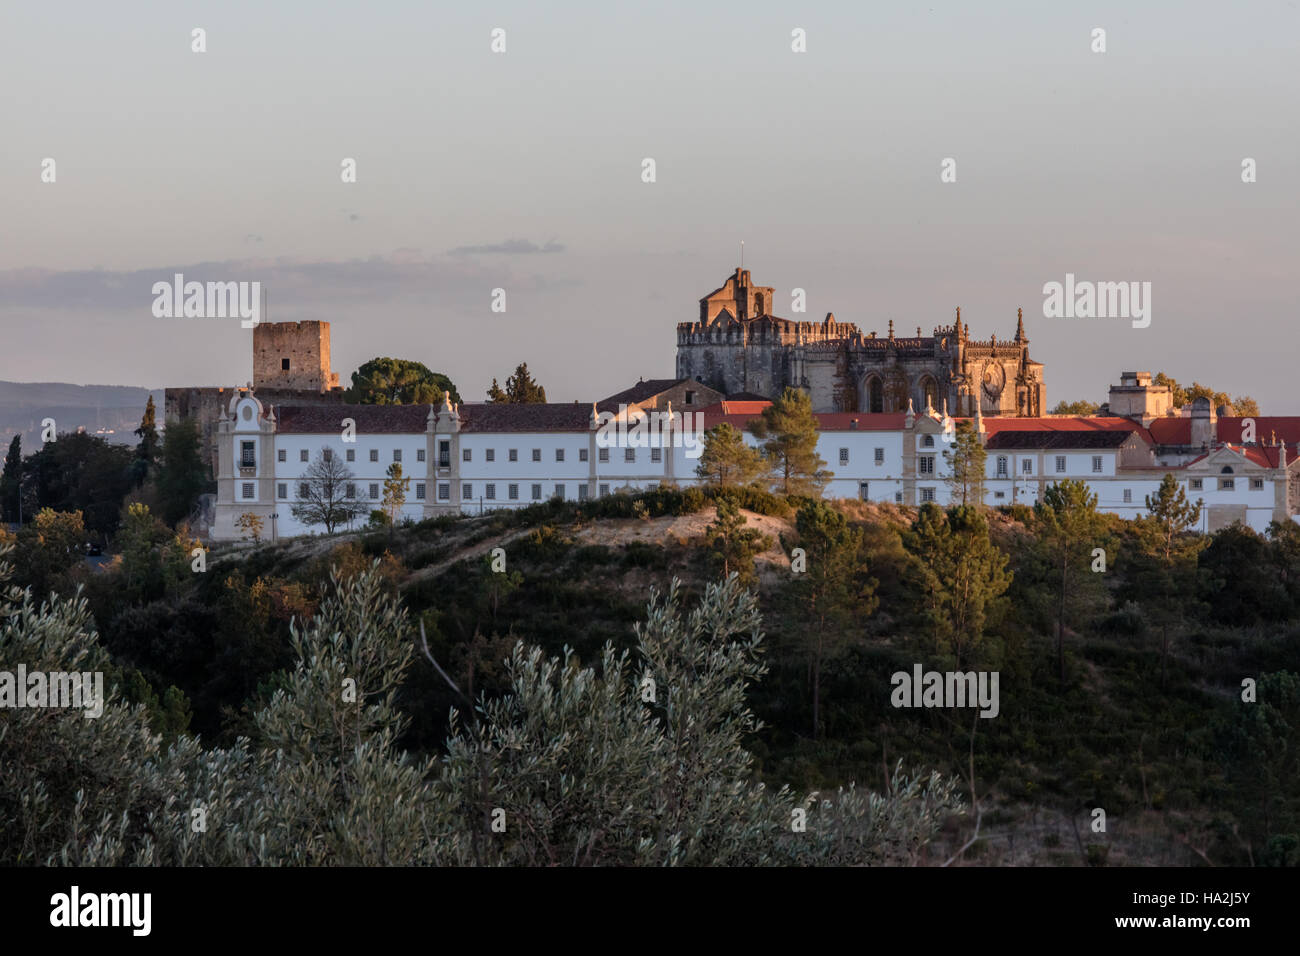 Convent of Christ, Tomar, Portugal Stock Photo